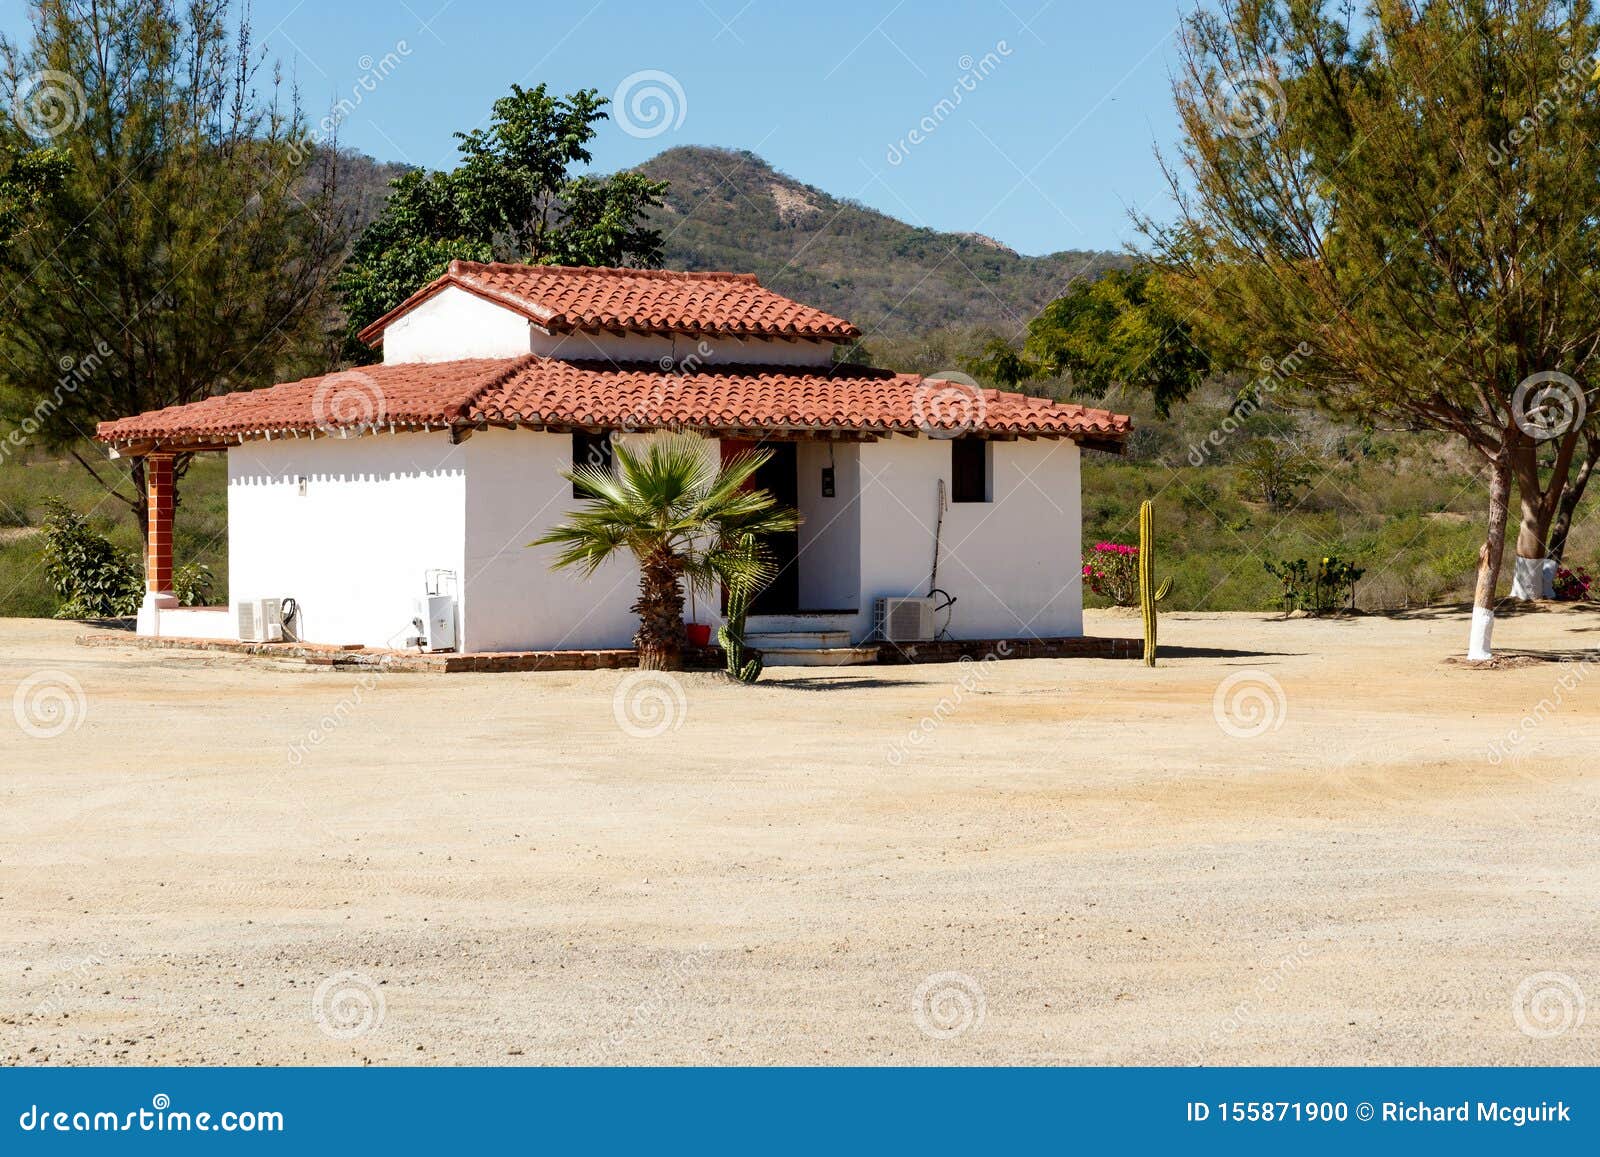 White Stucco House With A Red Clay Tile Roof Stock Photo Image of destination, mexican 155871900